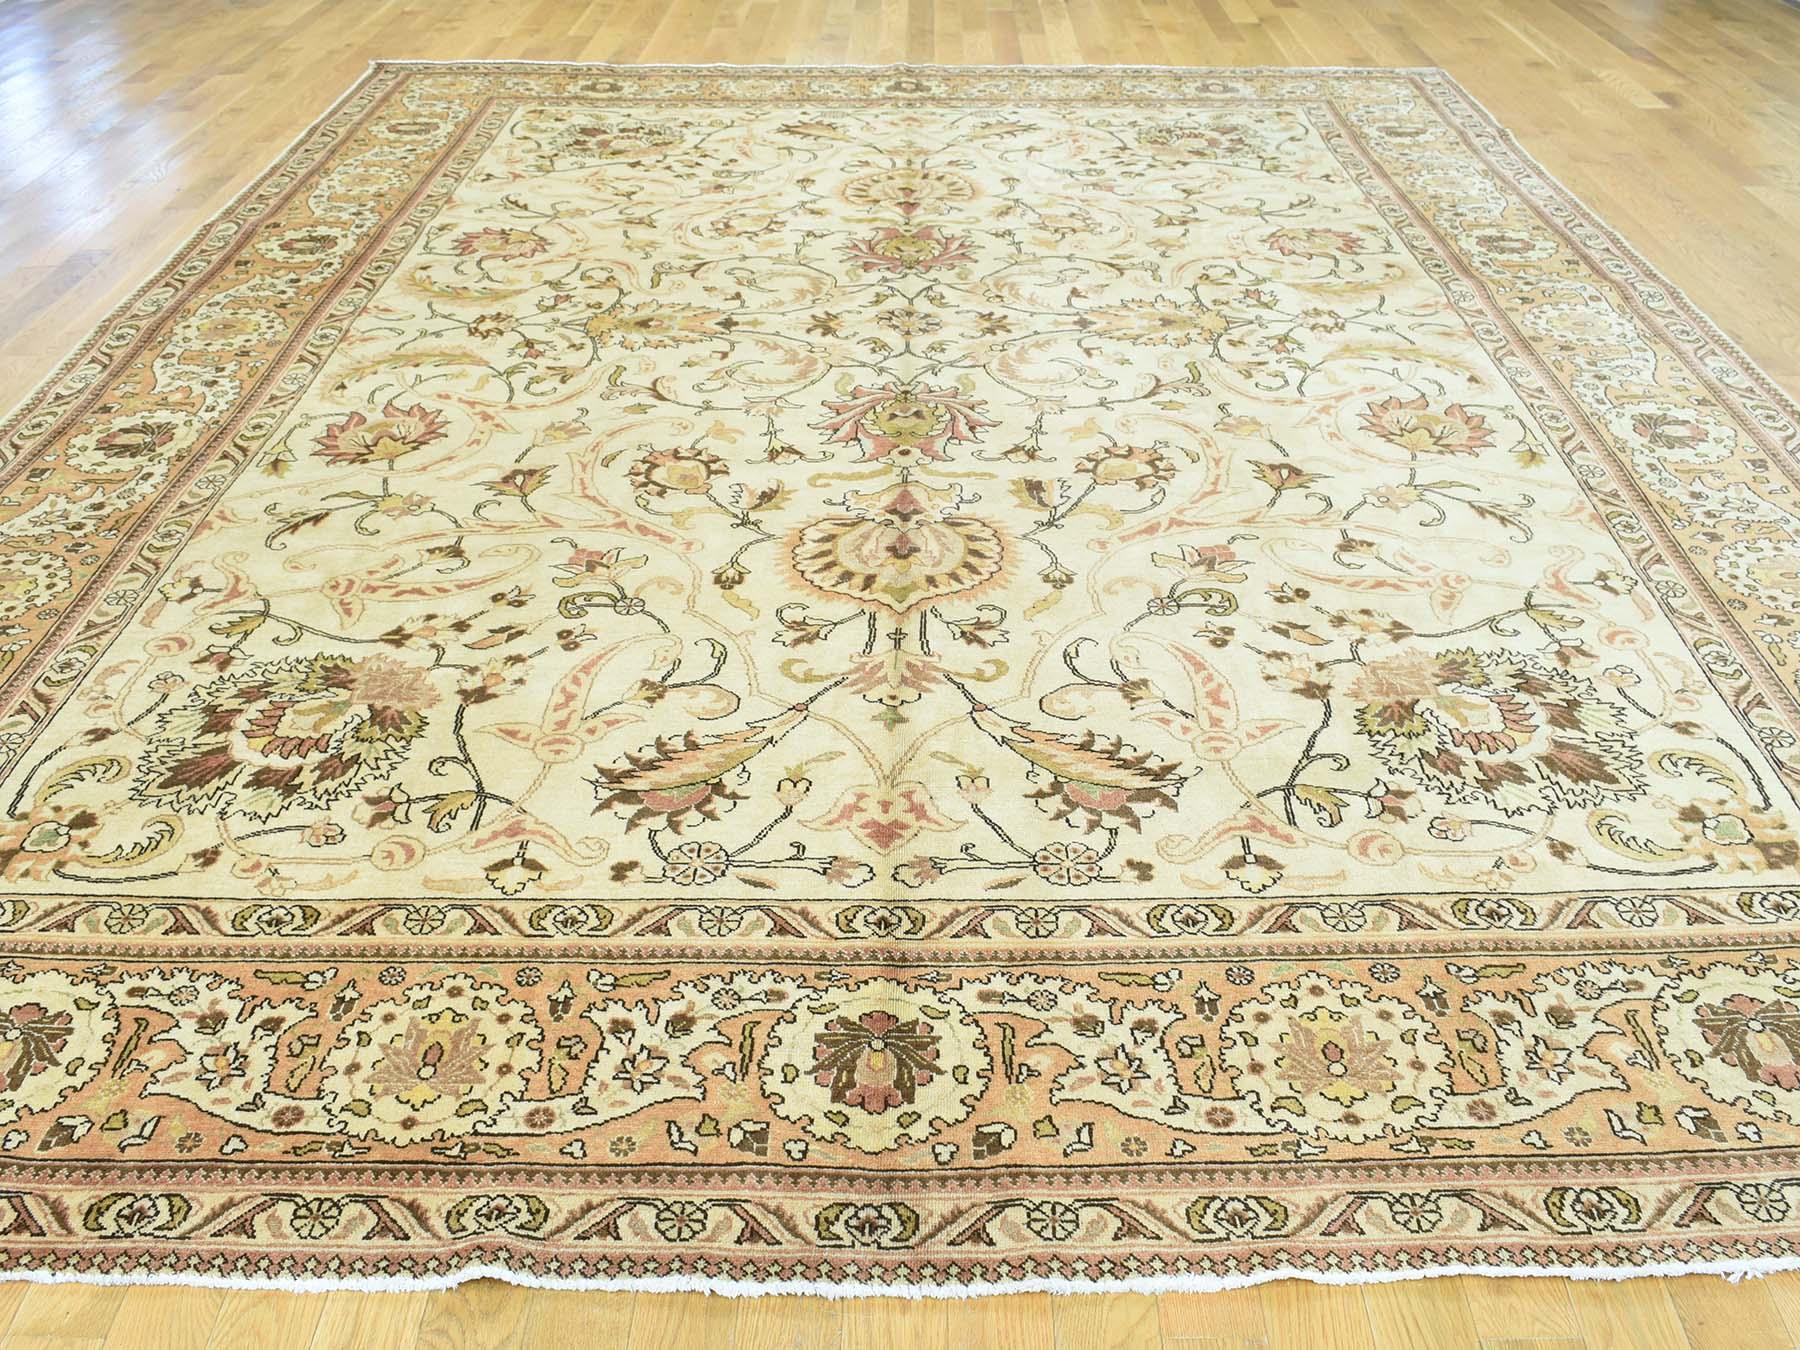 This is a genuine hand knotted Oriental rug. It is not hand tufted or machine made rug. Our entire inventory is made of either hand knotted or handwoven rugs.

Start a new room with this superb antique carpet. This handcrafted Persian Tabriz hand